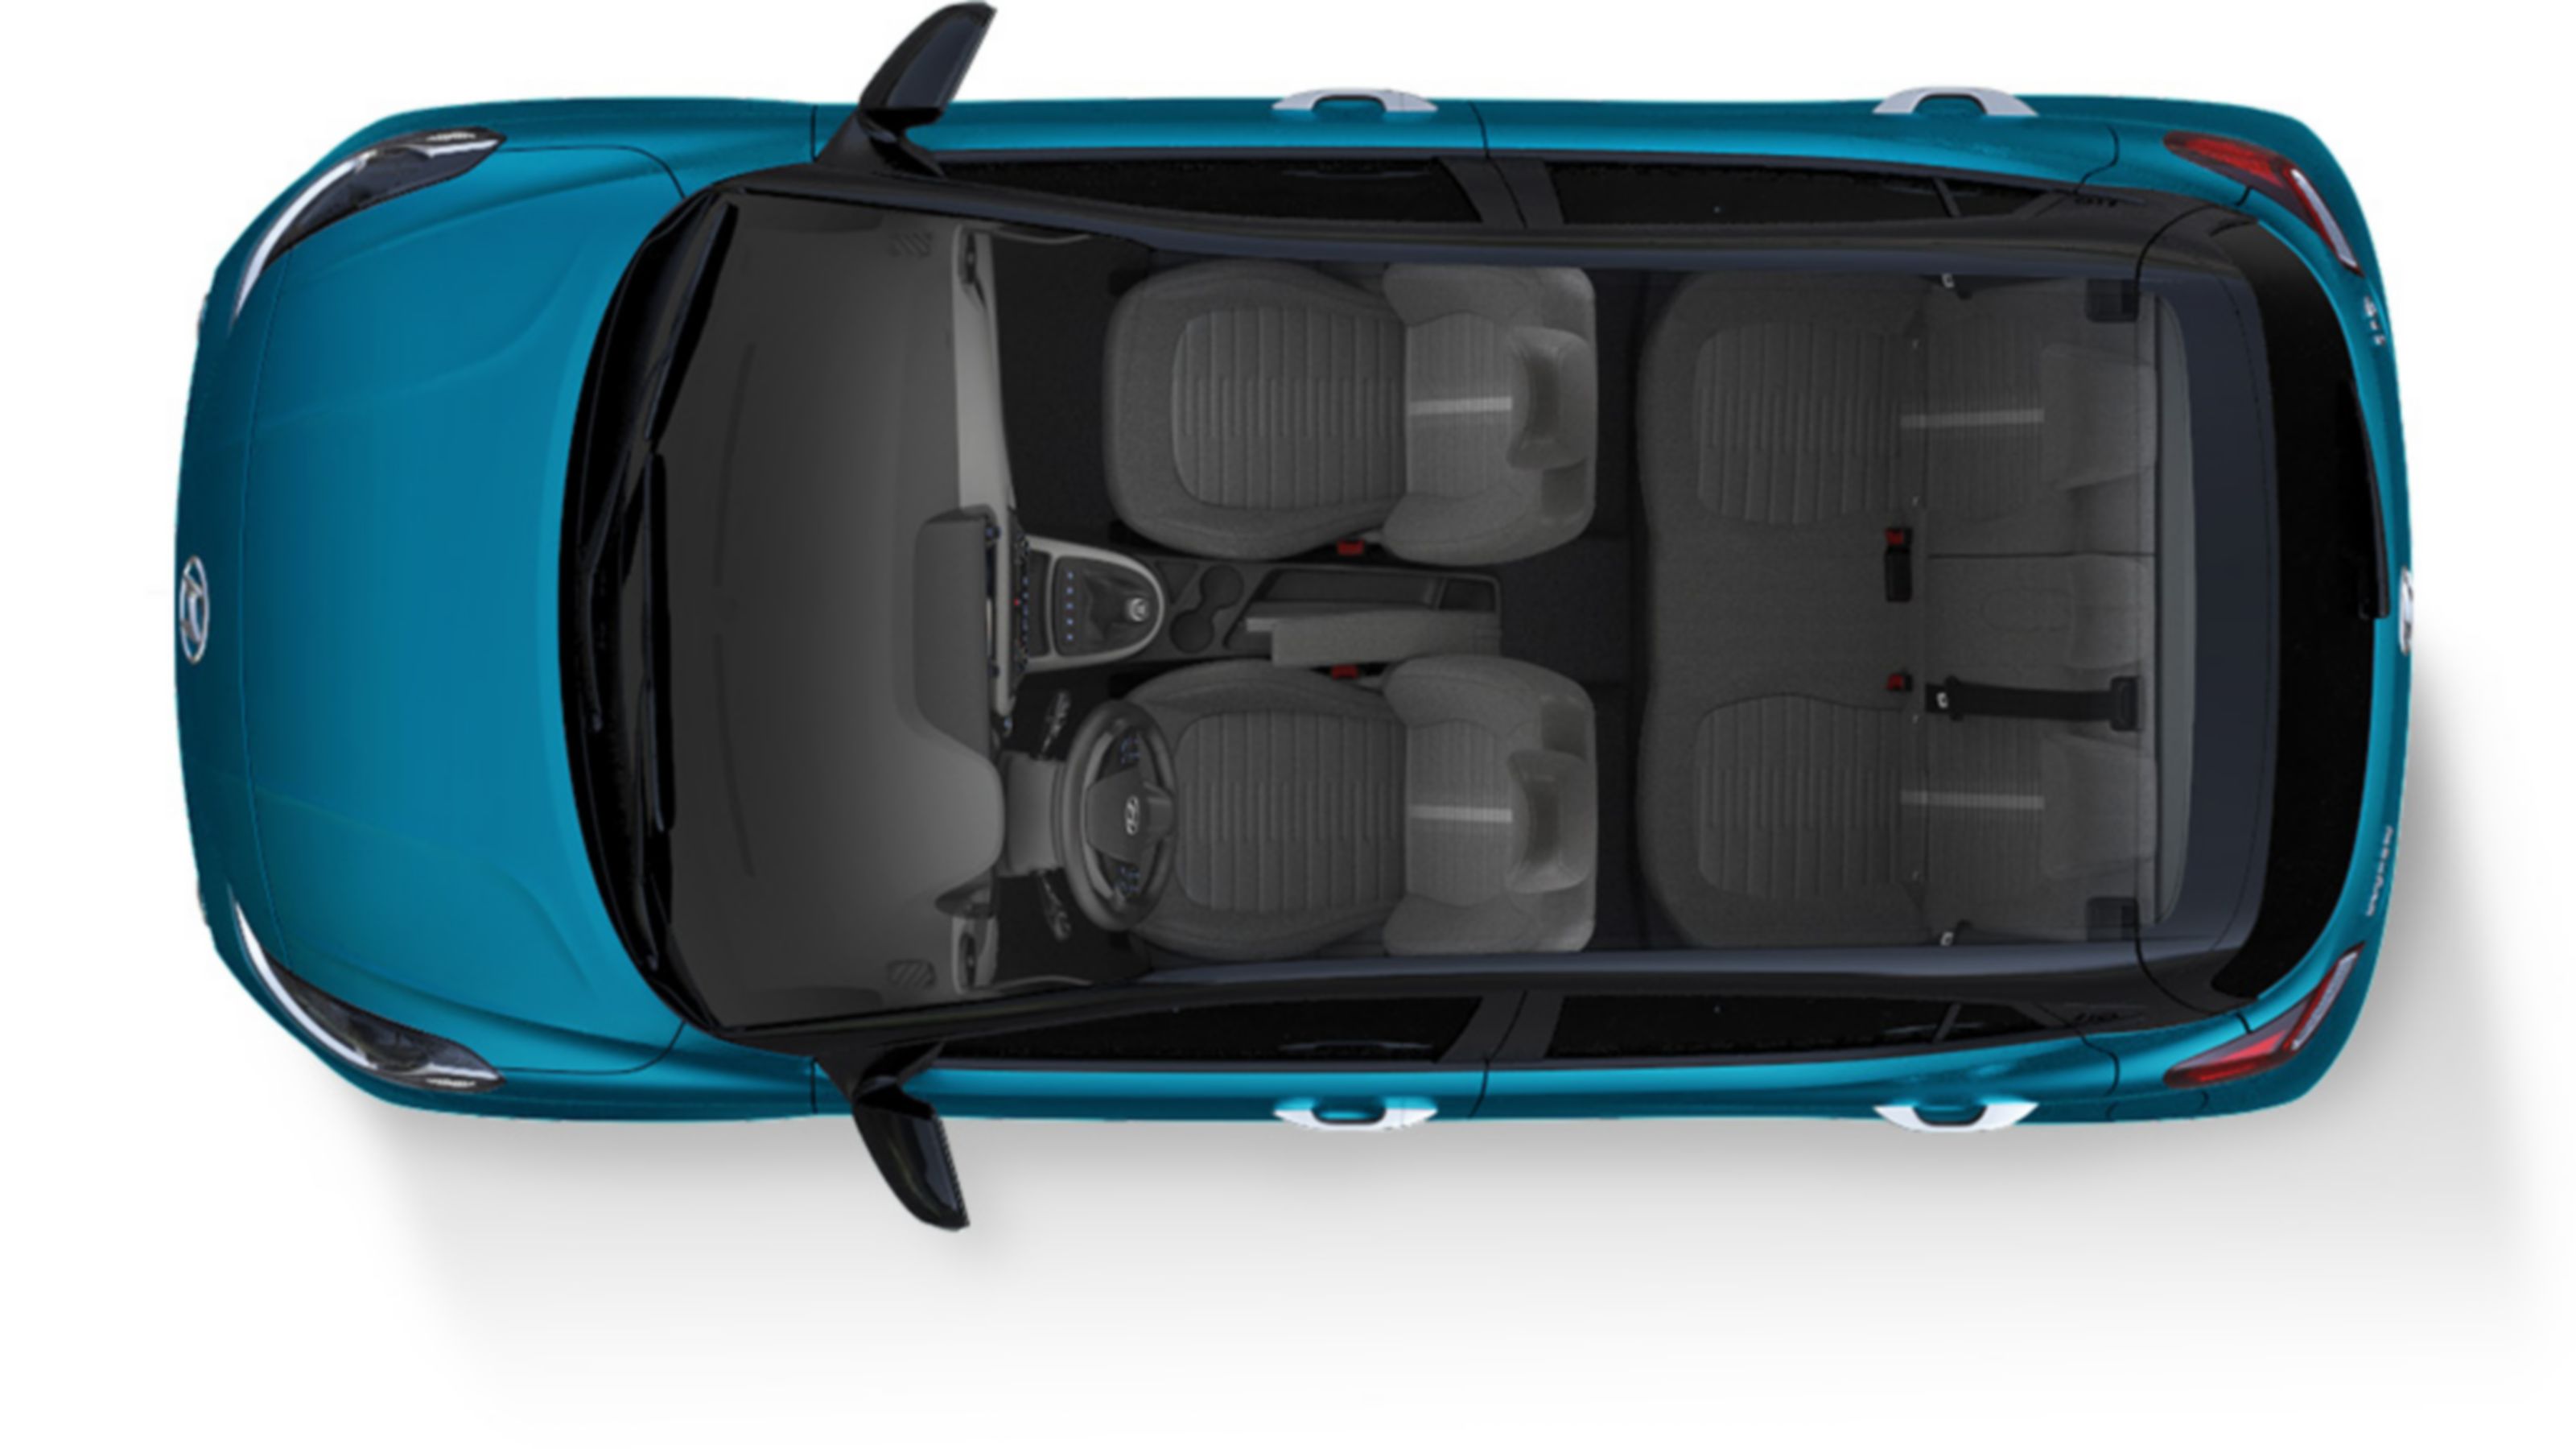 Birds-eye-view of the Hyundai i10 without the roof.